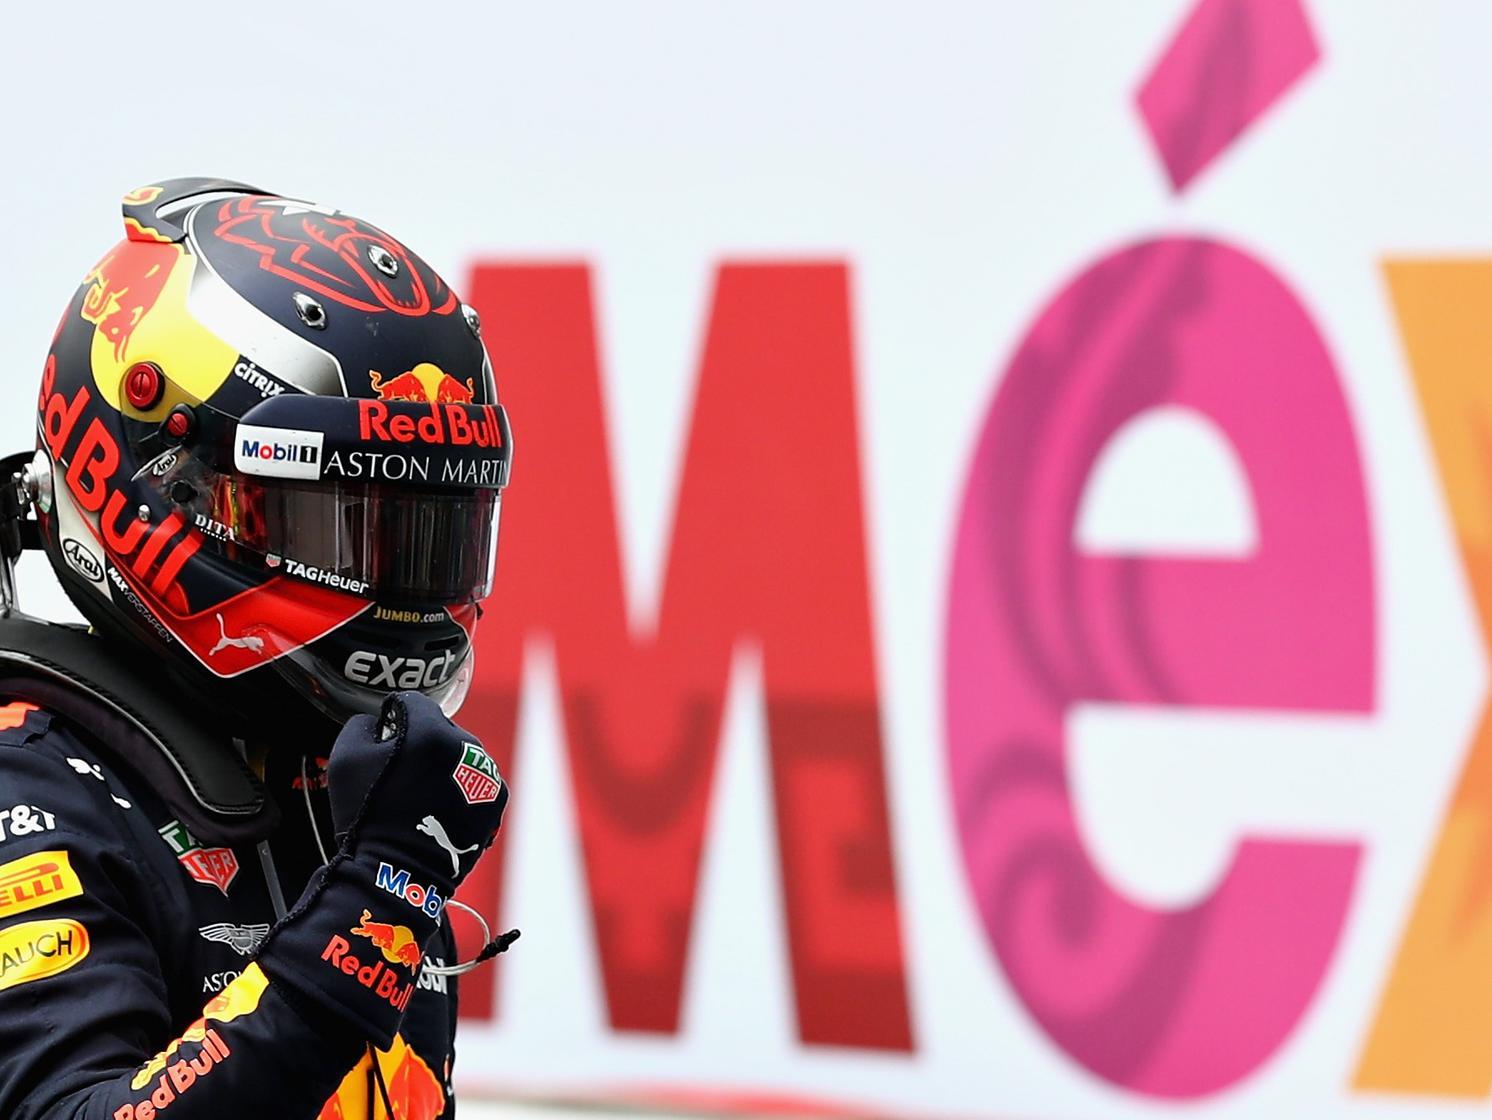 Mexico? More like Maxico! Verstappen claimed his second Mexican GP win in 2018, overcoming the disappointment of missing out on pole position to team-mate Daniel Ricciardo.